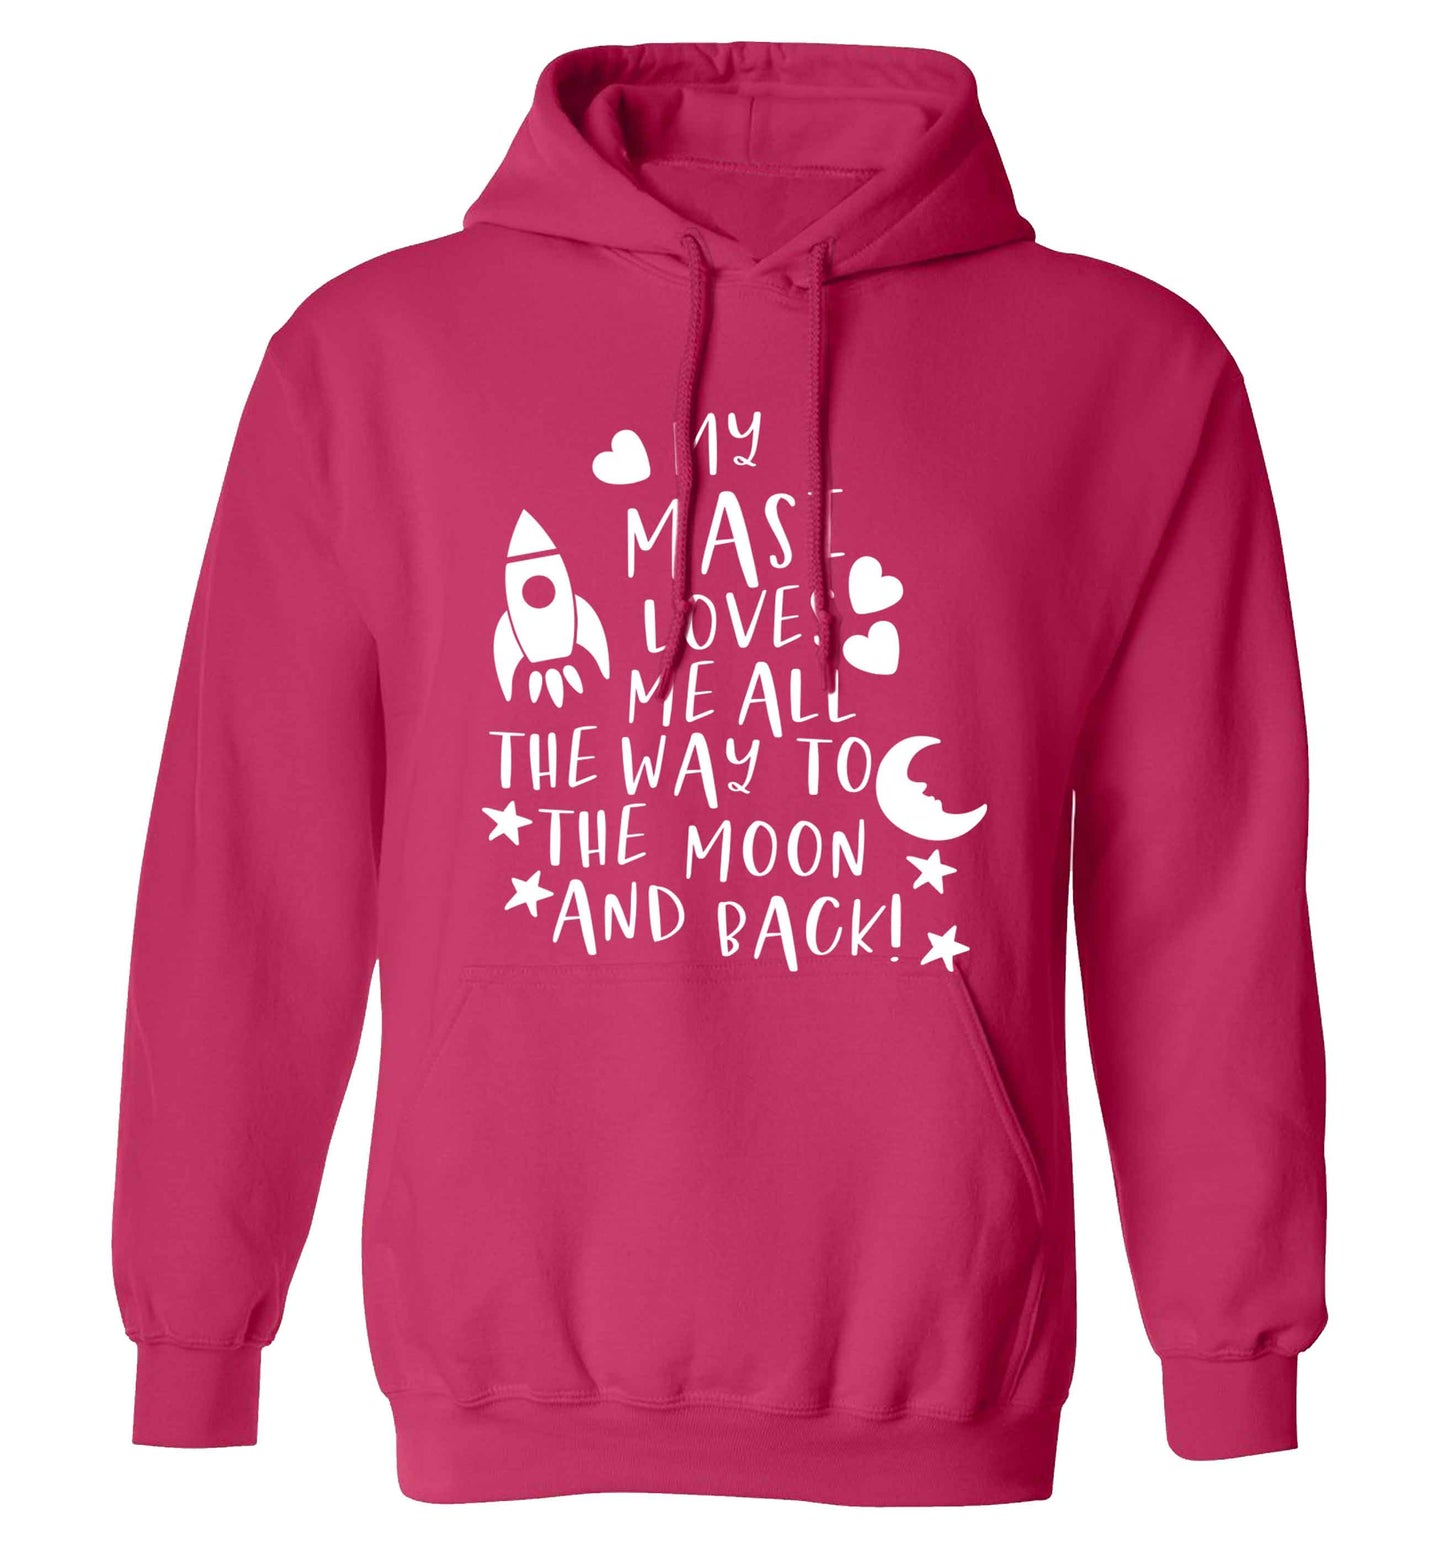 My masi loves me all the way to the moon and back adults unisex pink hoodie 2XL